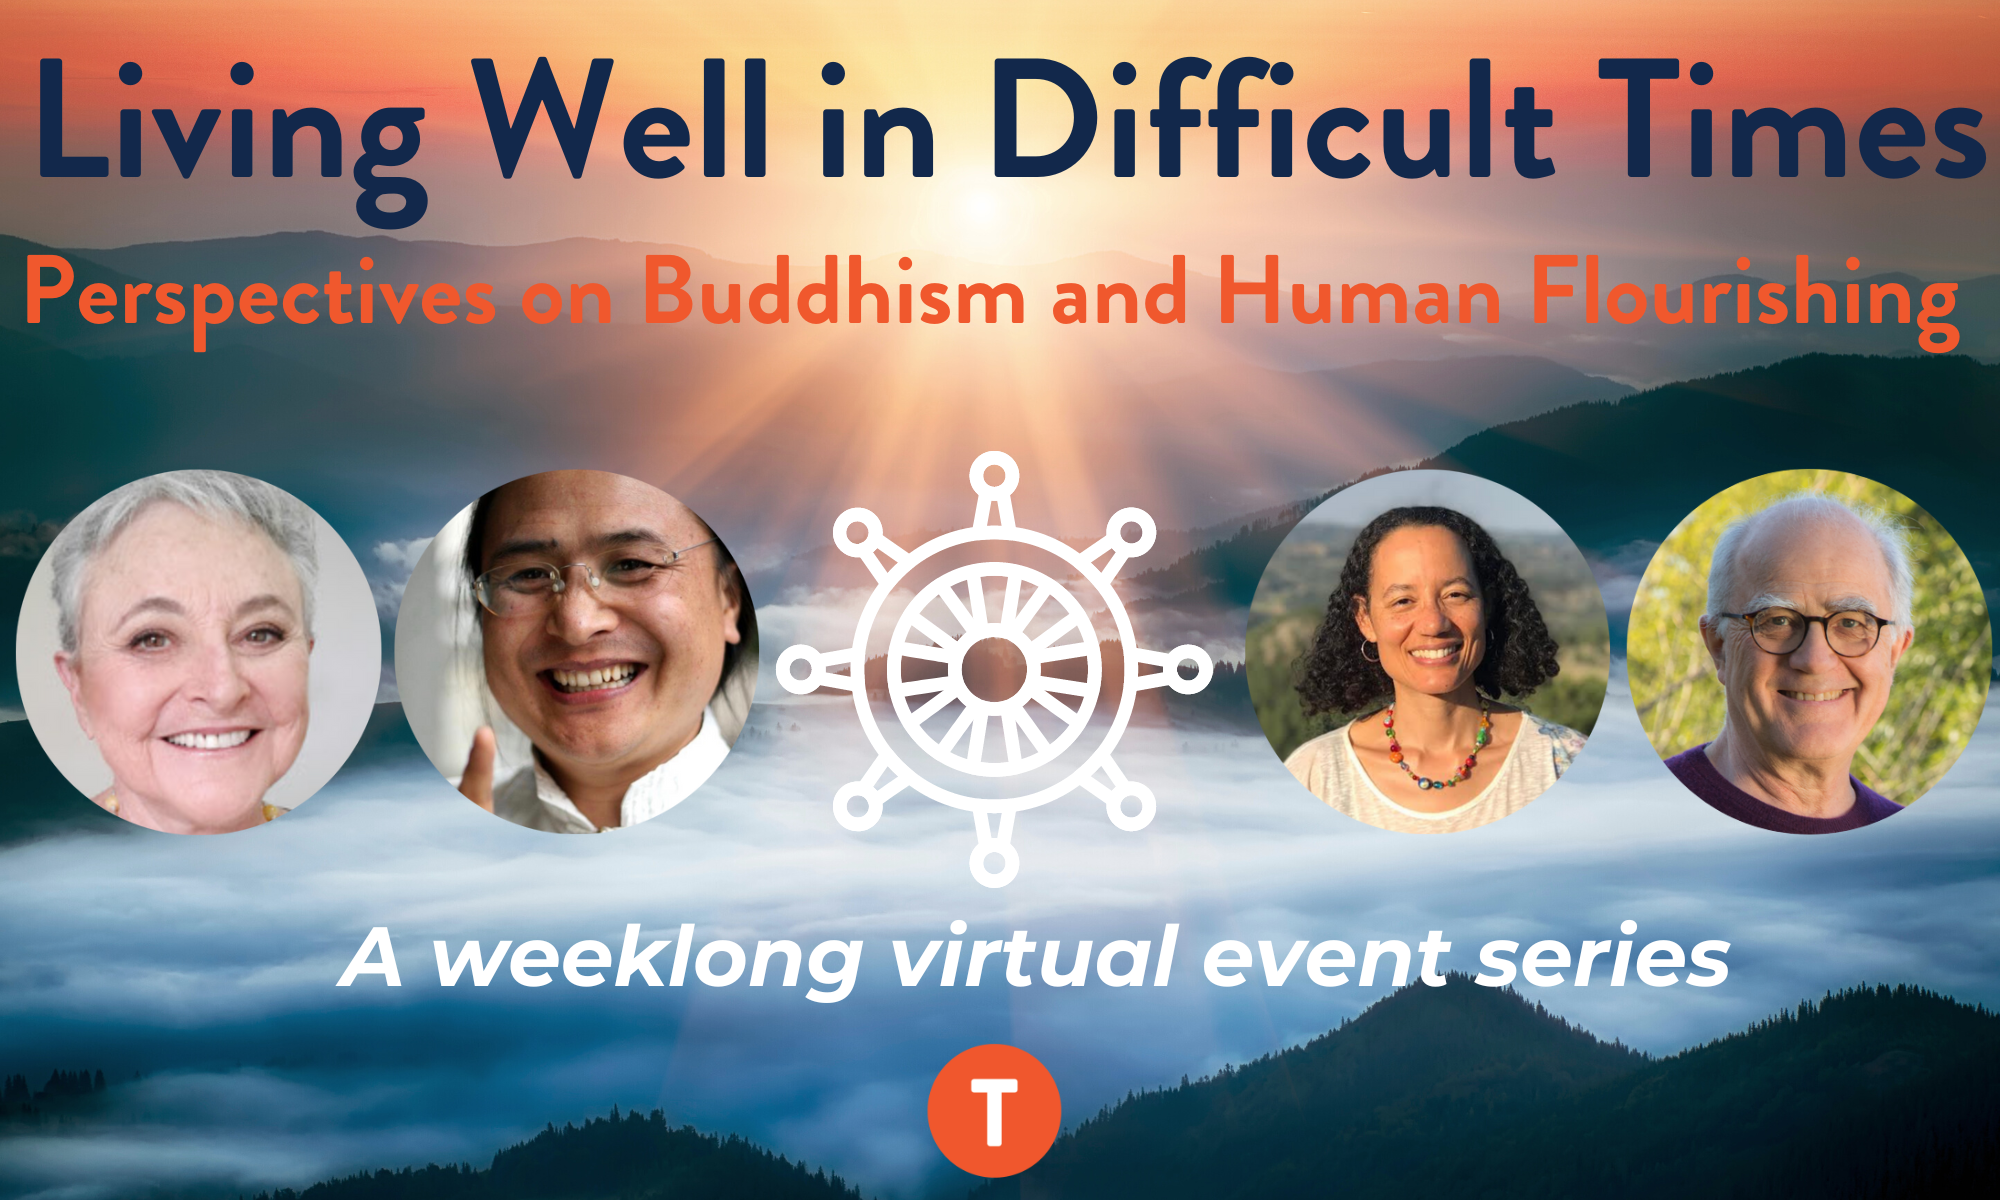 Living Well in Difficult Times: Perspectives on Buddhism and Human Flourishing